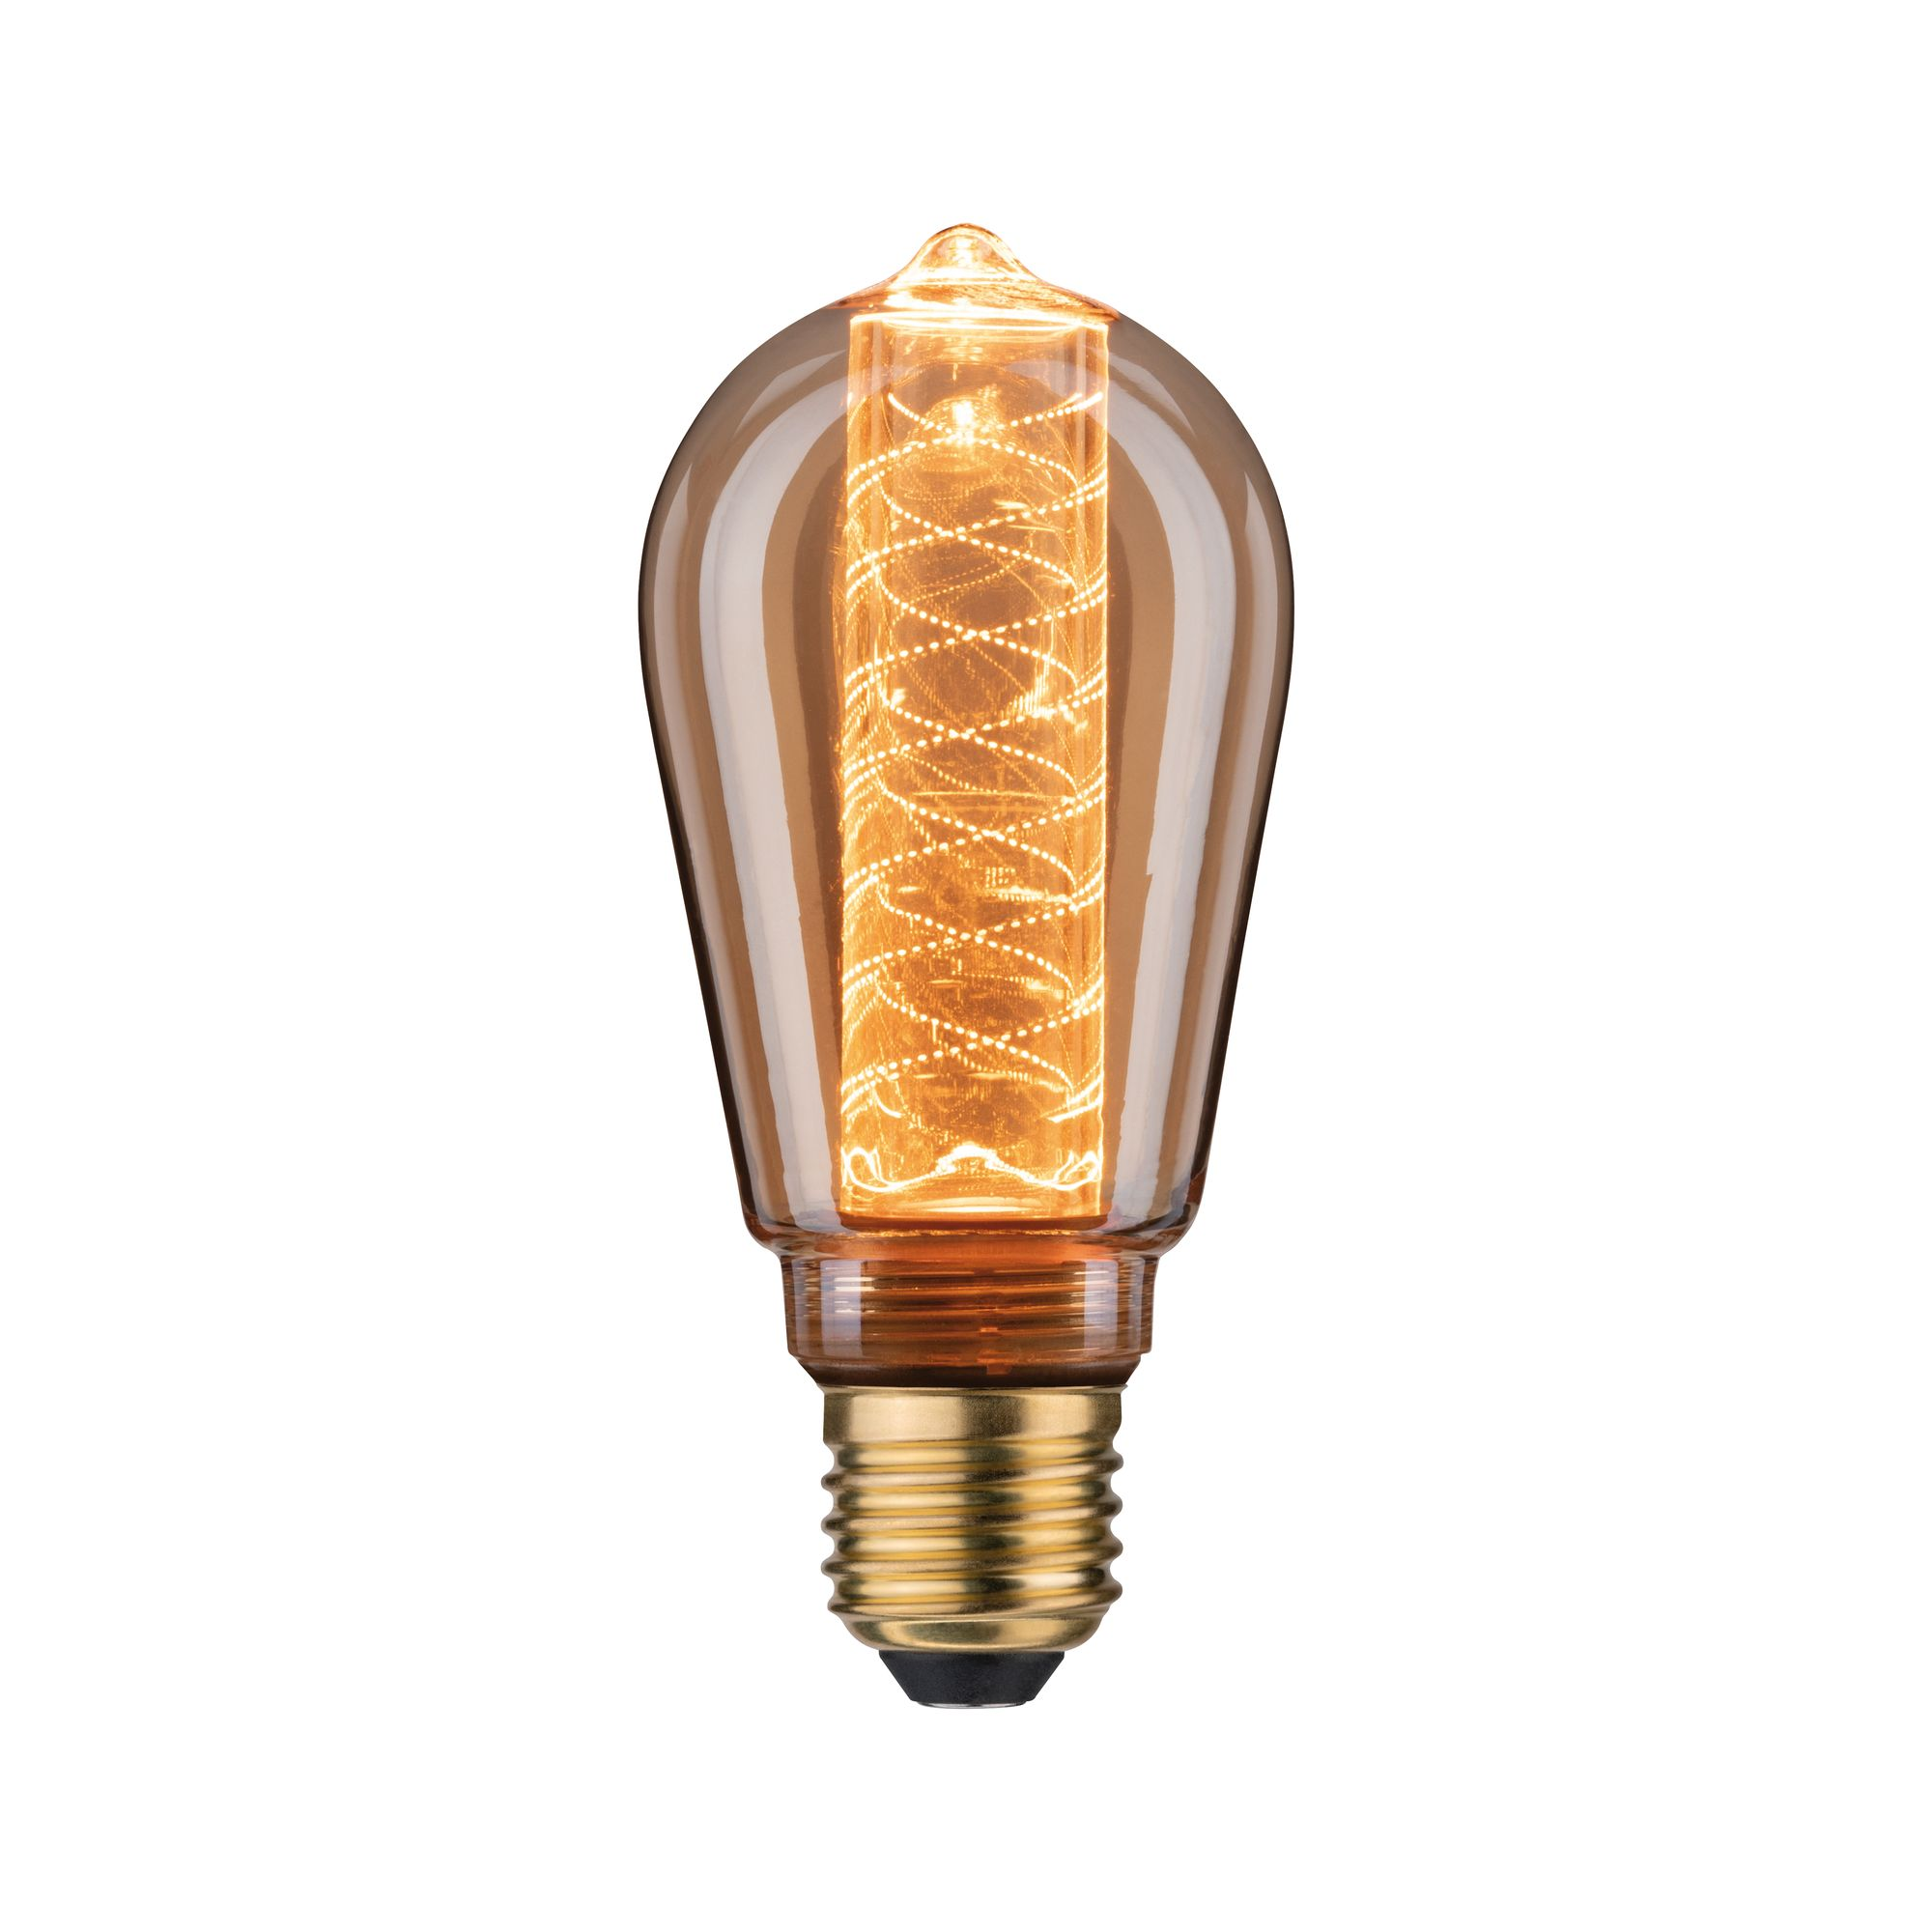 LED-Kolbenlampe ST64 'Inner Glow Spirale' E27 4 W (21 W), 200 lm warmgold + product picture